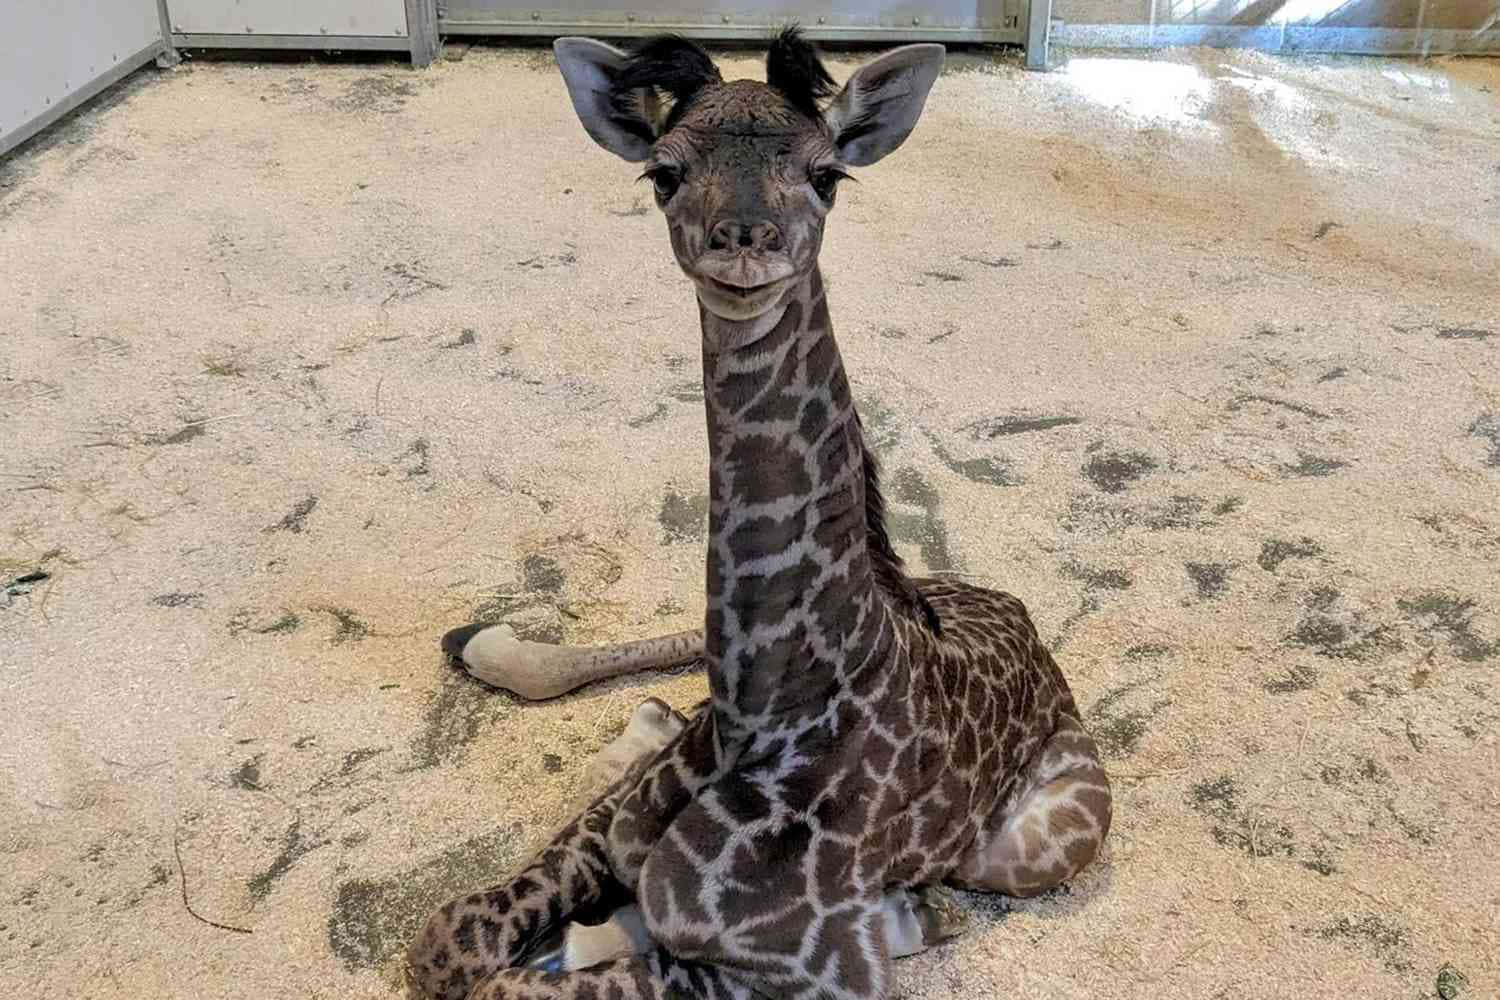 A Baby Giraffe Is Sitting On The Ground